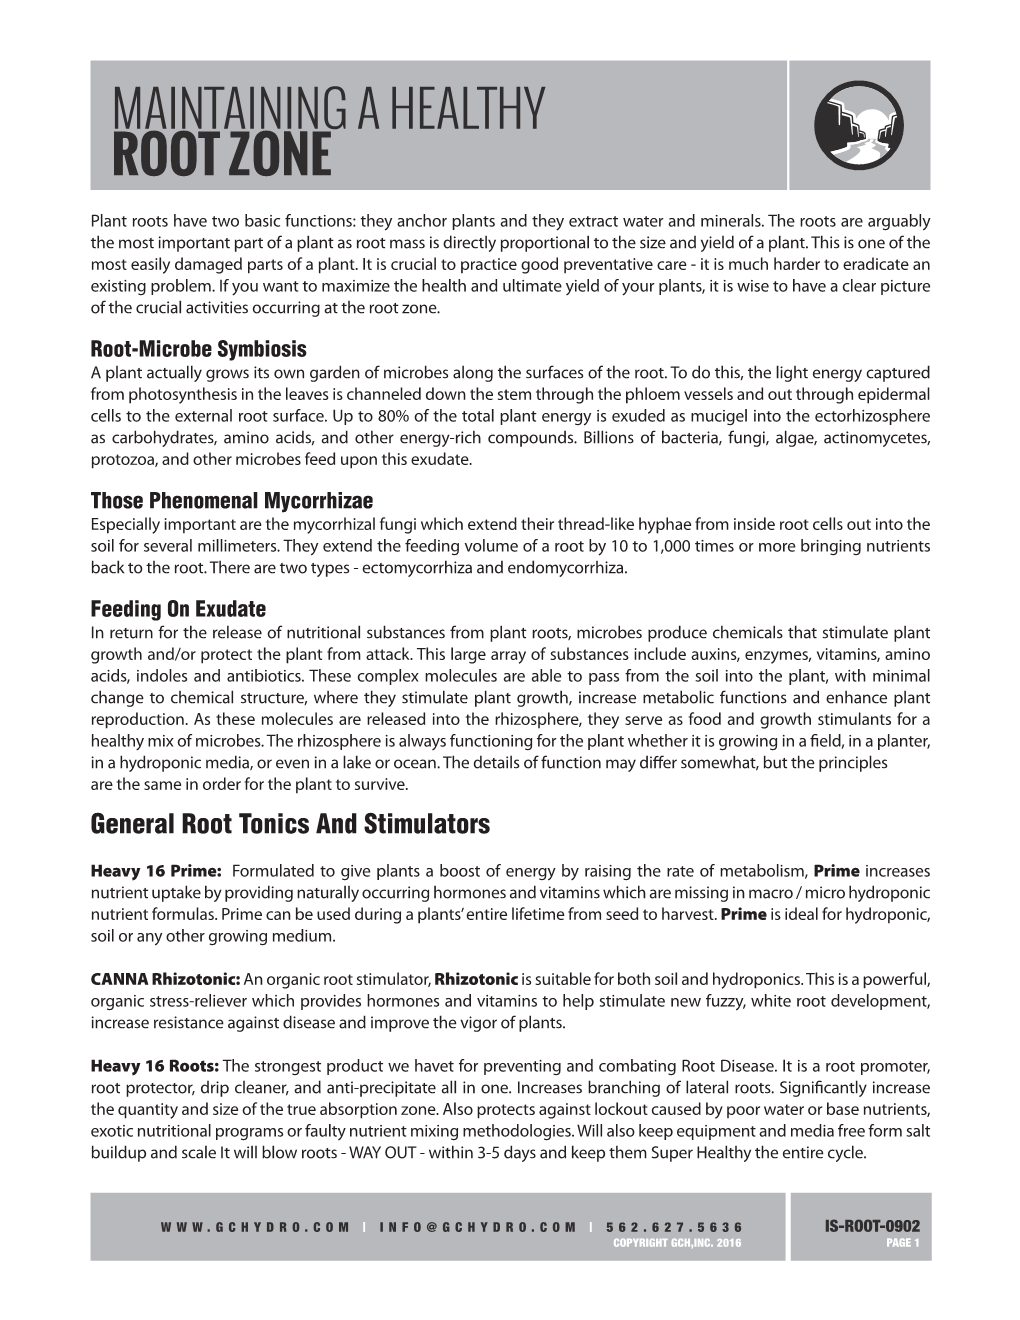 Maintaining a Healthy Root Zone